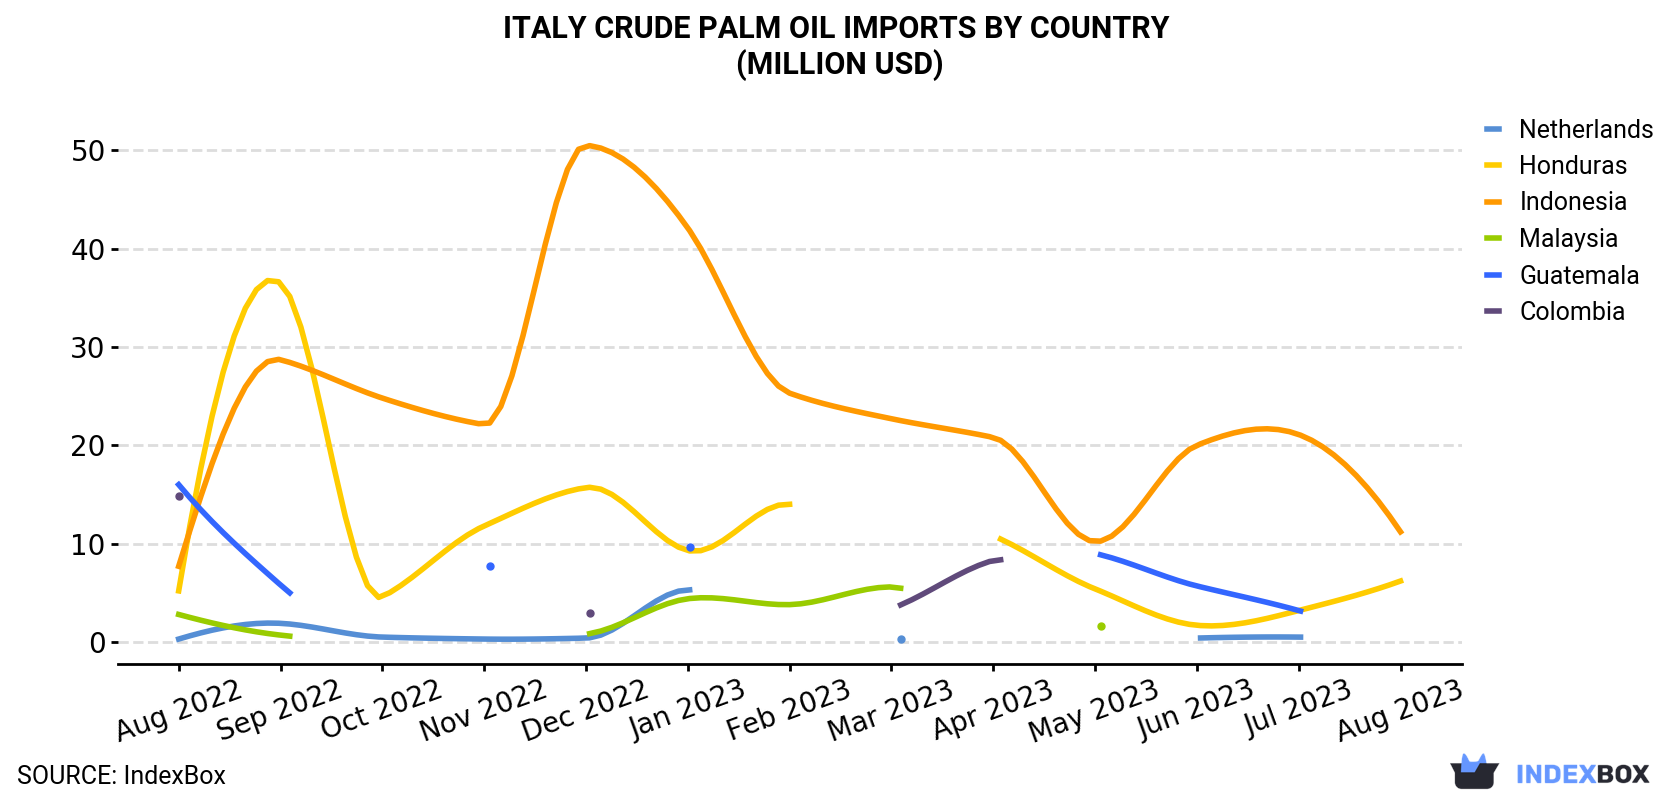 Italy Crude Palm Oil Imports By Country (Million USD)